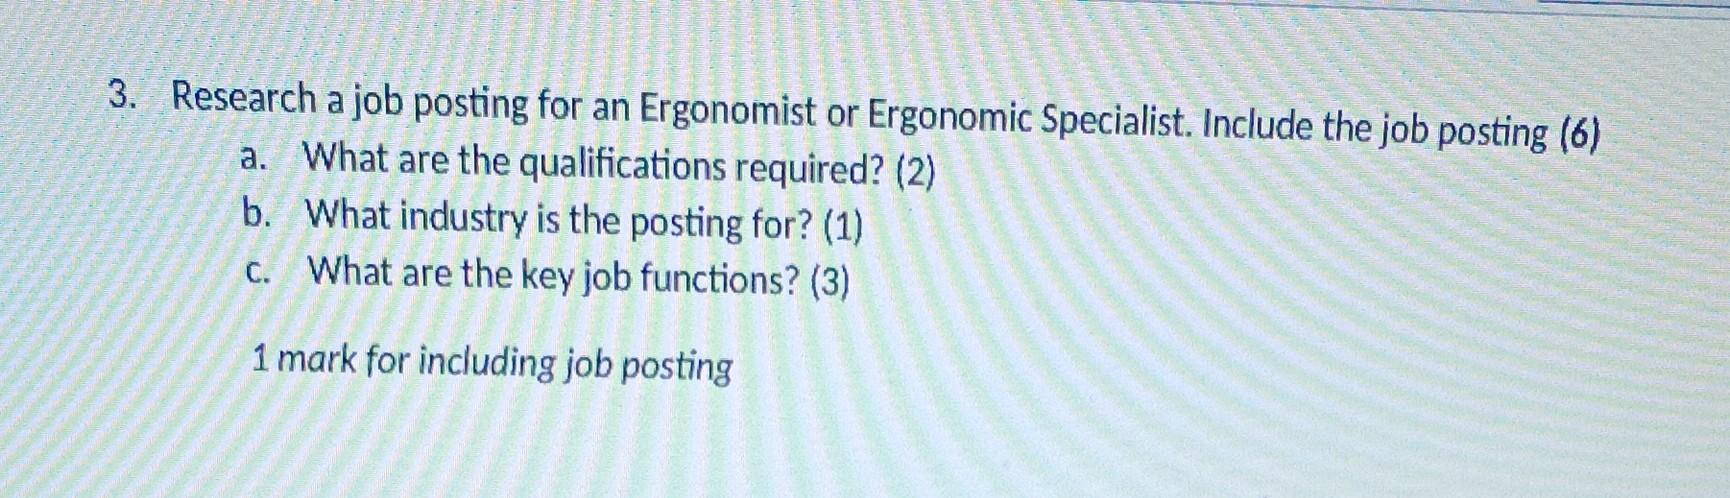 3. Research a job posting for an Ergonomist or Ergonomic Specialist. Include the job posting (6)a. What are the qualificatio